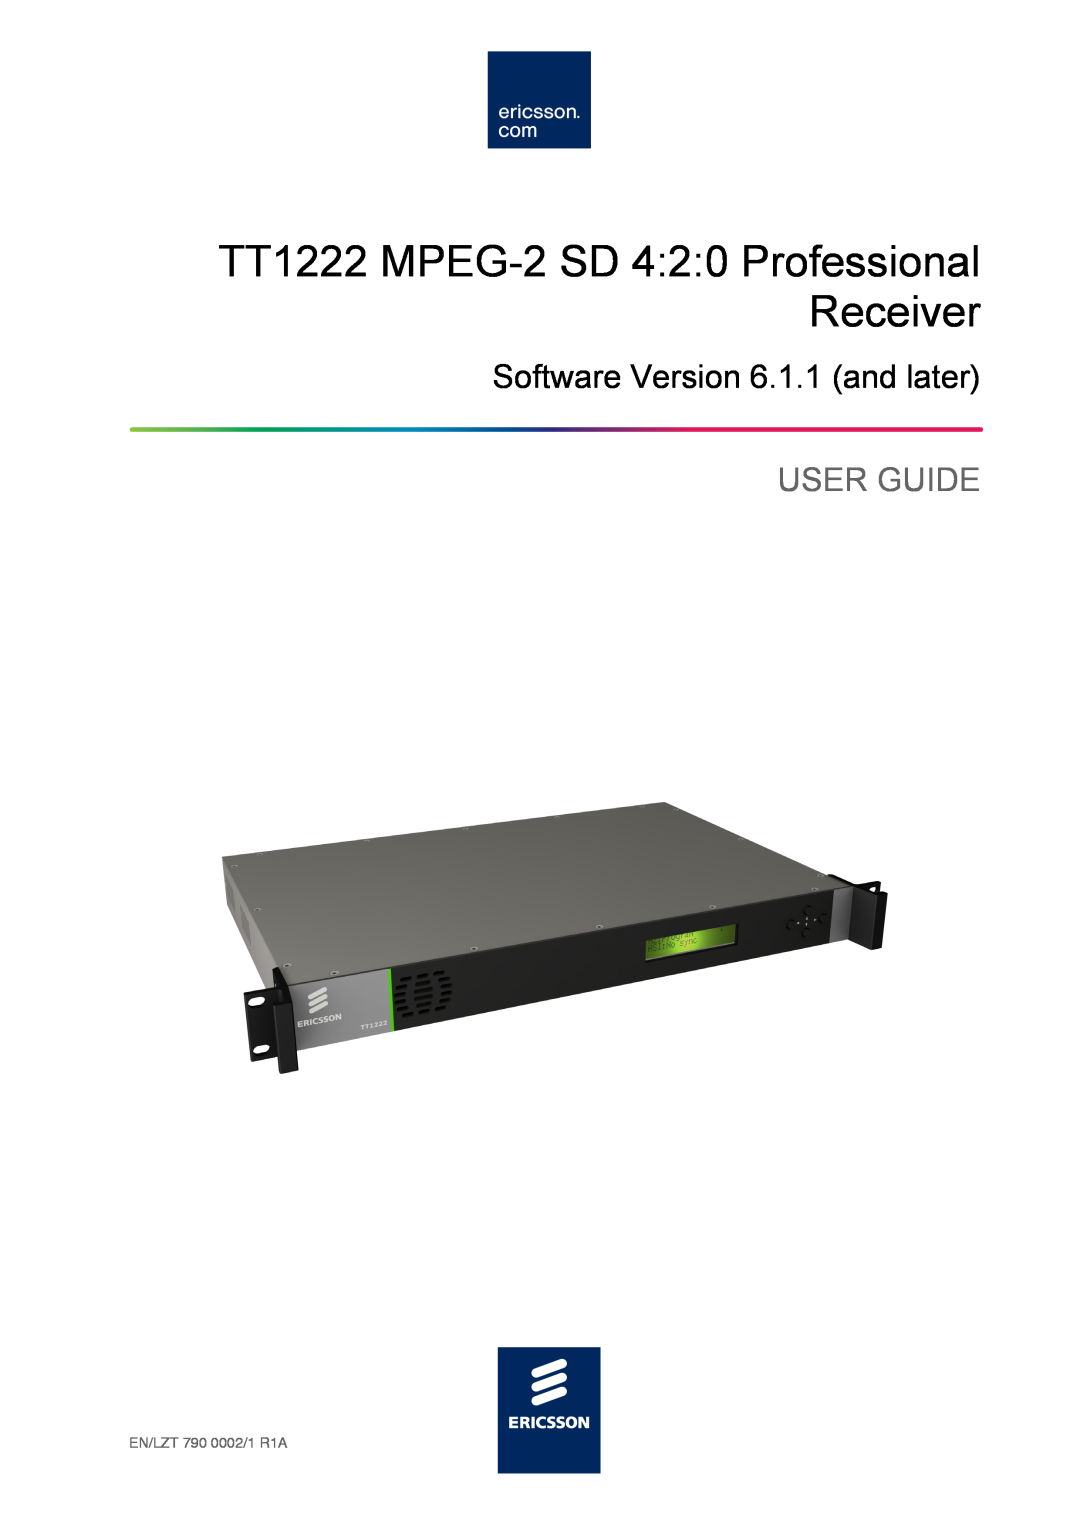 Ericsson manual Software Version 6.1.1 and later, TT1222 MPEG-2SD 4 2 0 Professional Receiver, User Guide 